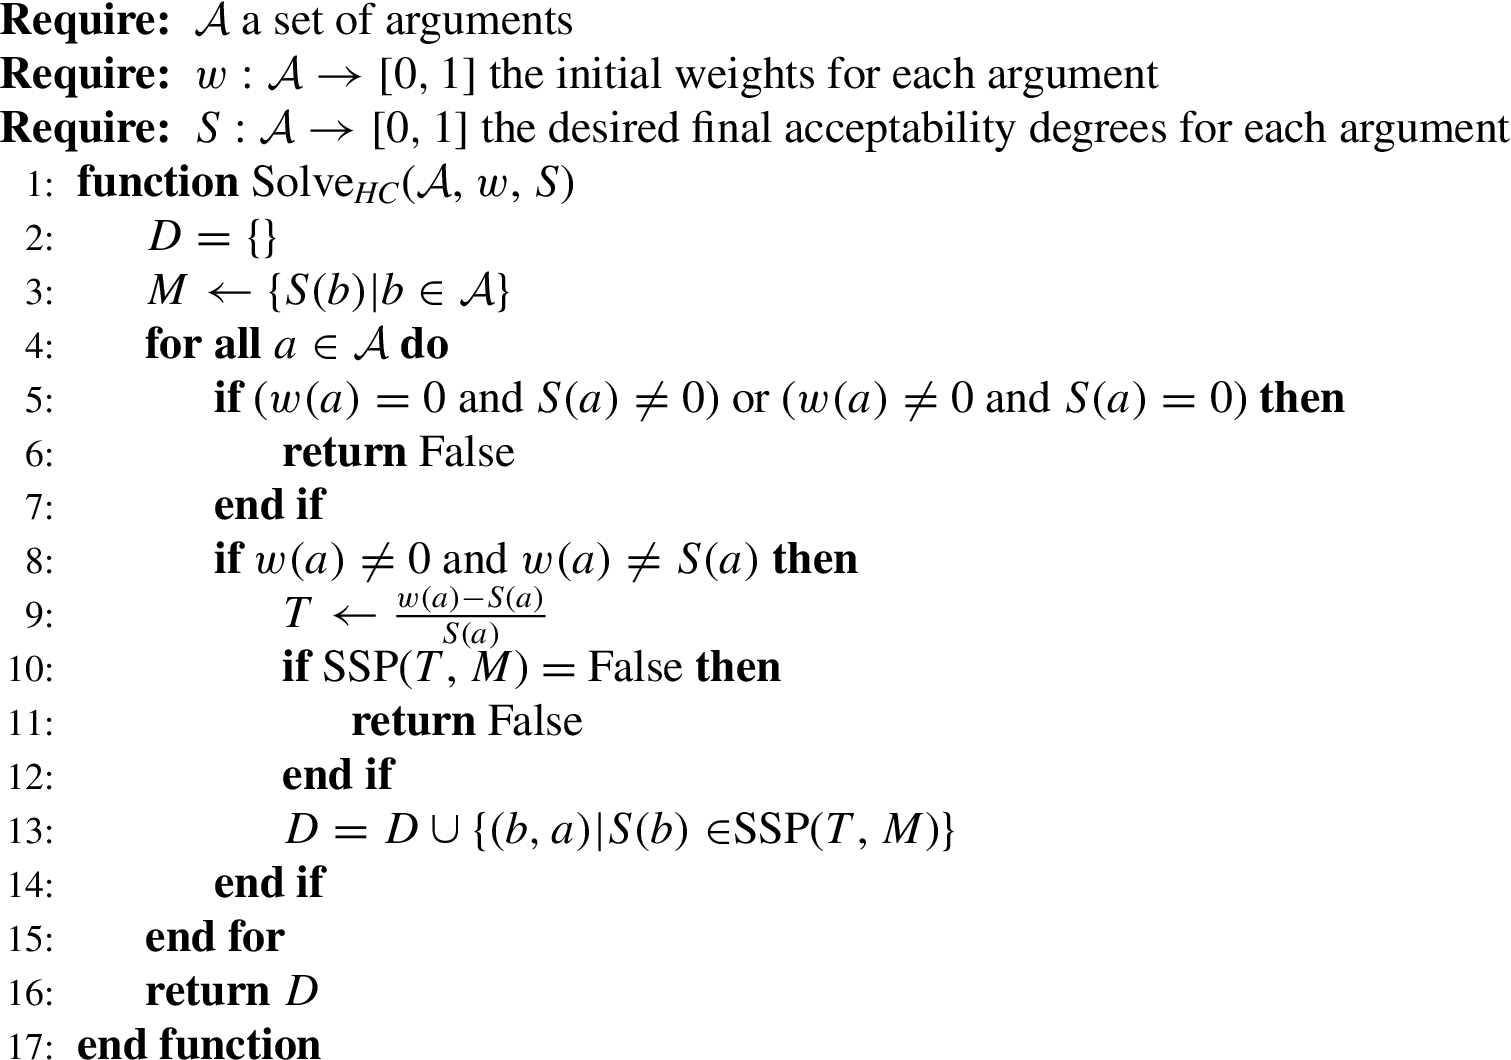 Procedure to solve DECcHC. SSP (lines 10, 13) calls a subset-sum solver which returns the elements of M that sum up to T, or false if no such elements can be found